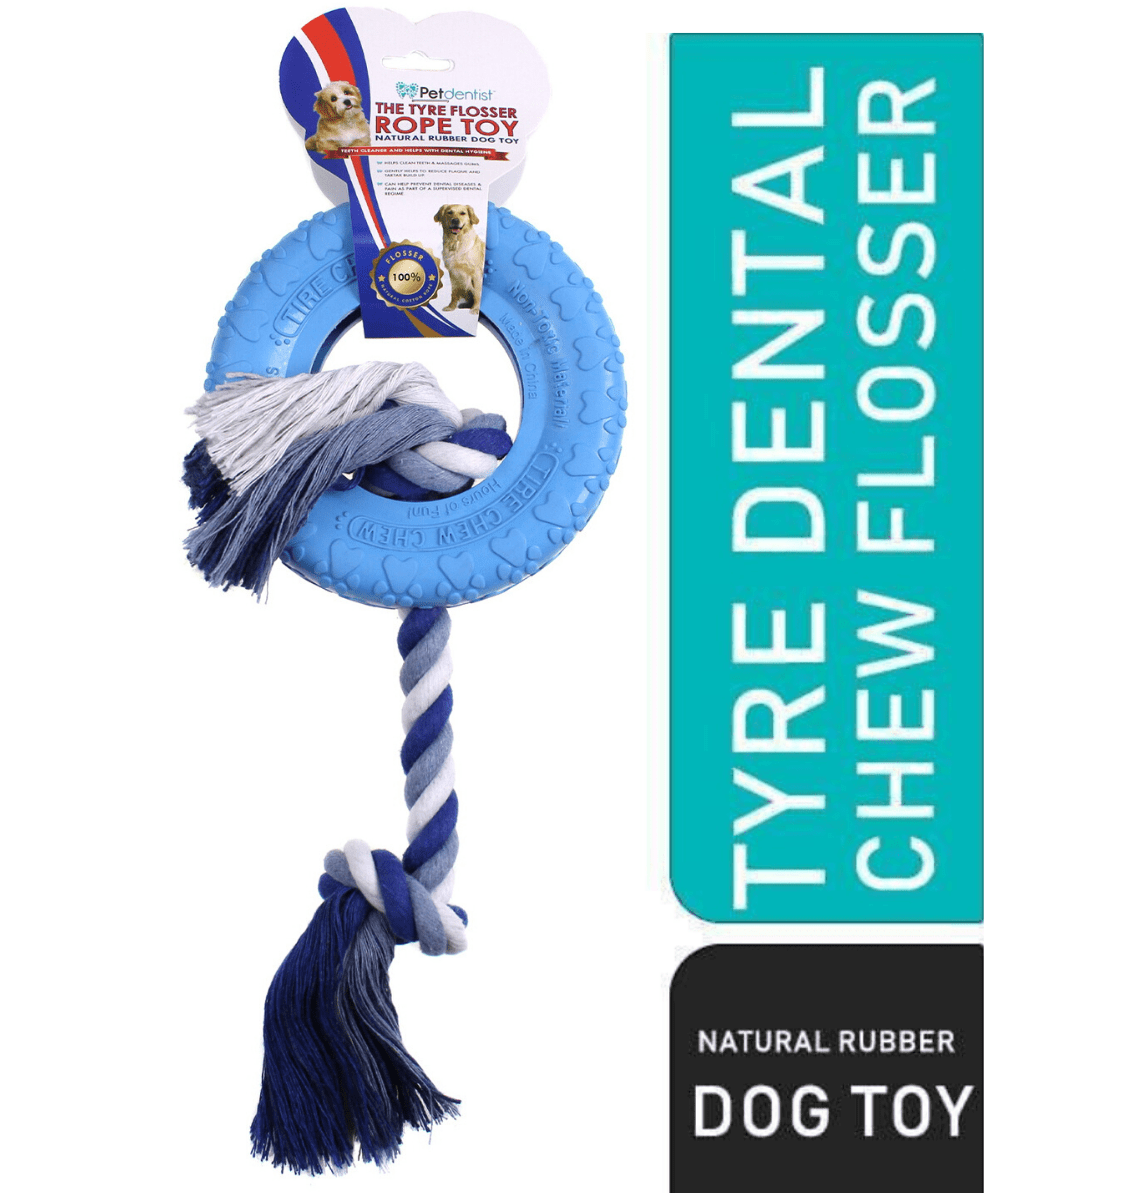 Dog Tyre Rubber Chew Tug Toy with Rope Flosser – Pink - Petdentist